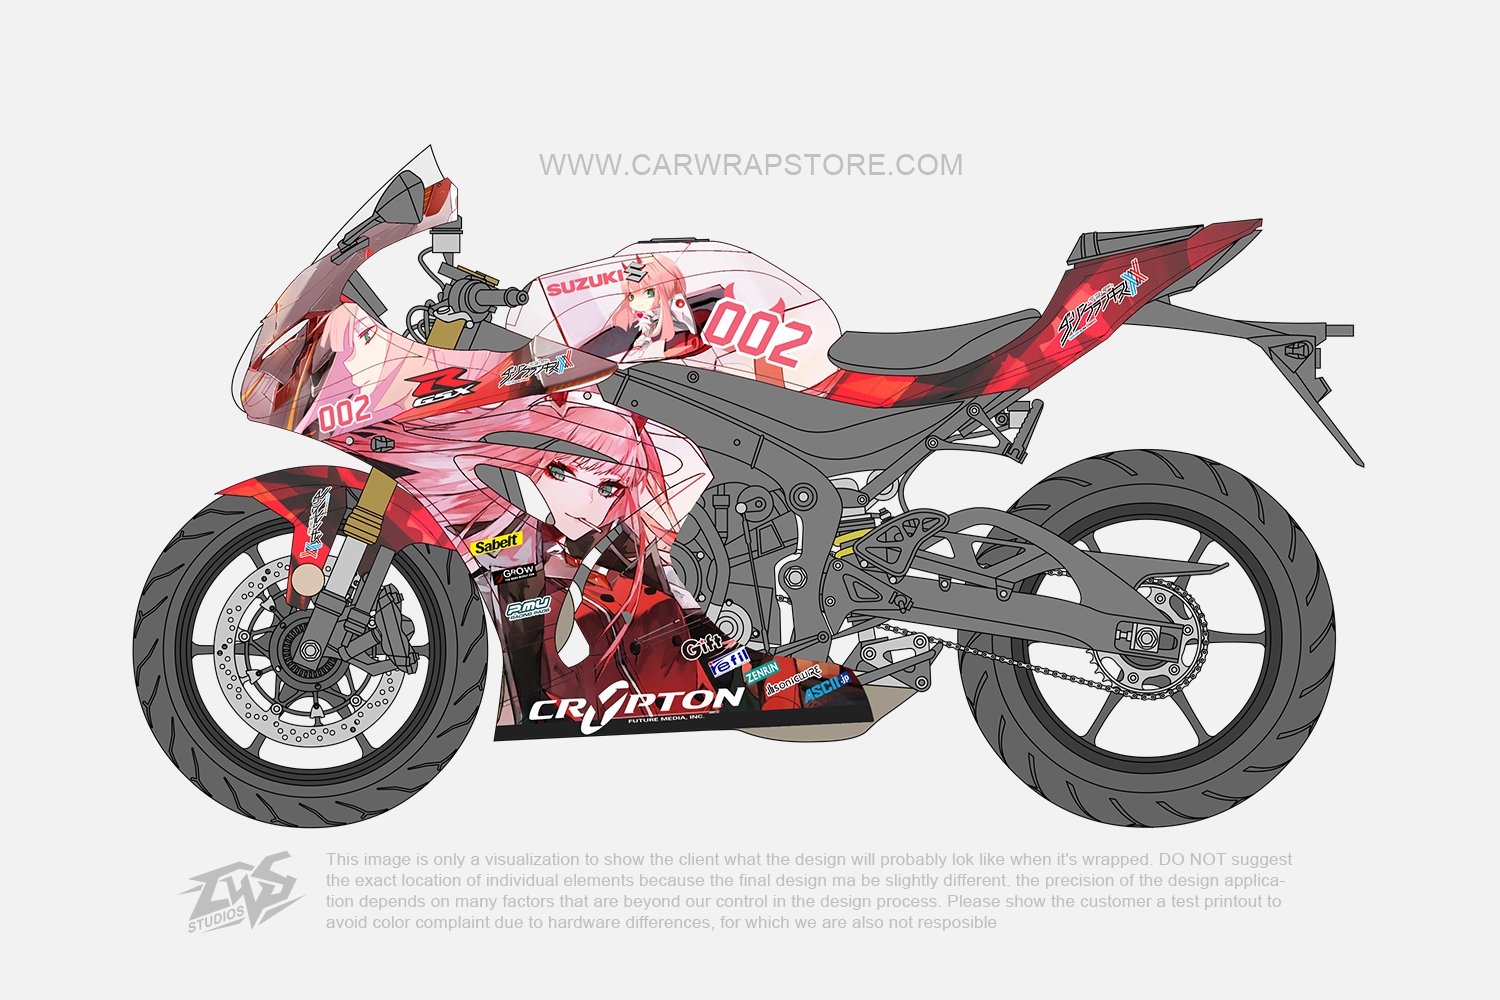 Darling in the franxx 002【MT-03】 - Car Wrap Store